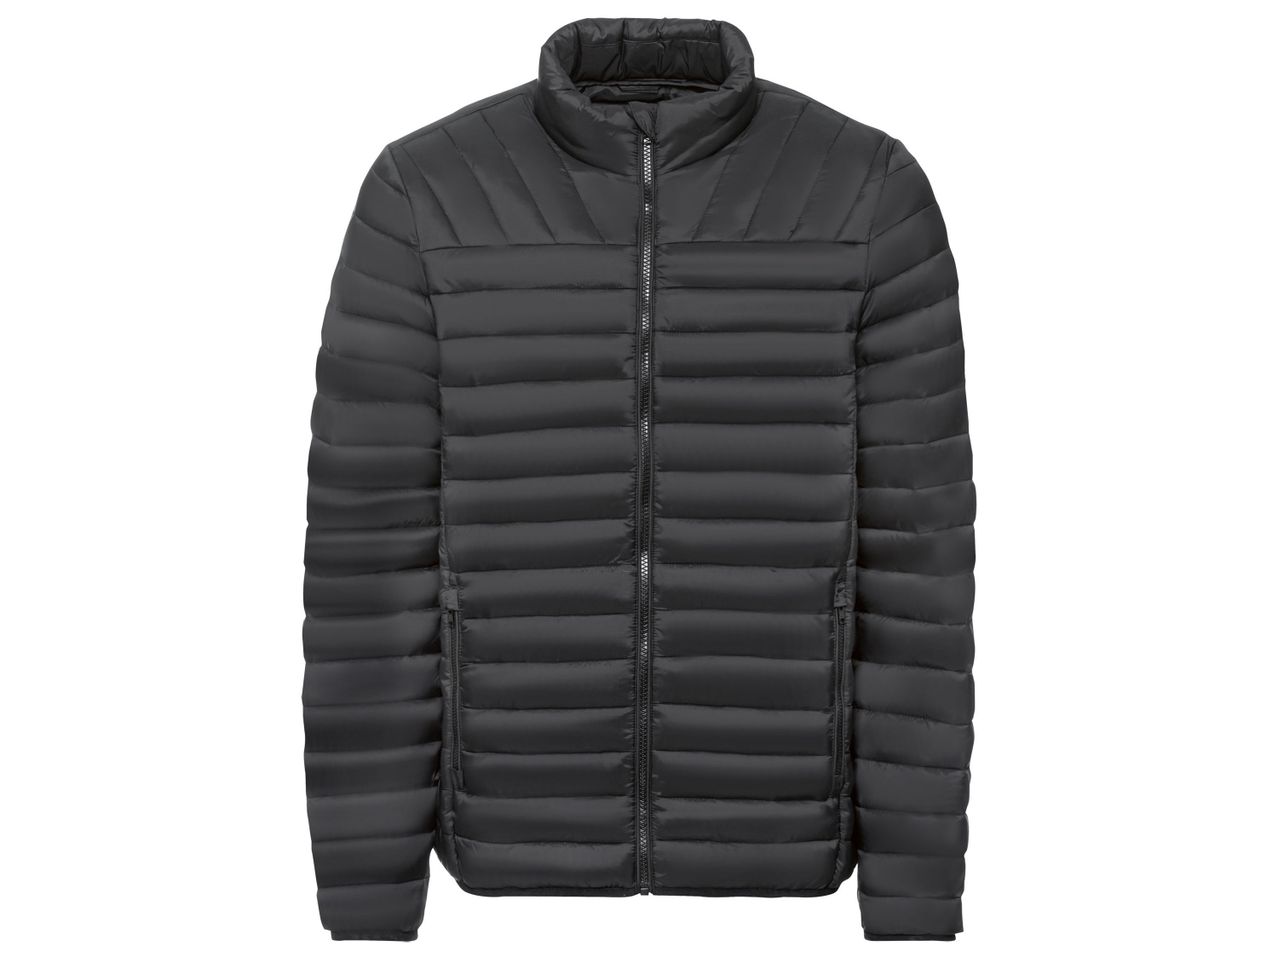 Go to full screen view: Men’s Lightweight Jacket - Image 1